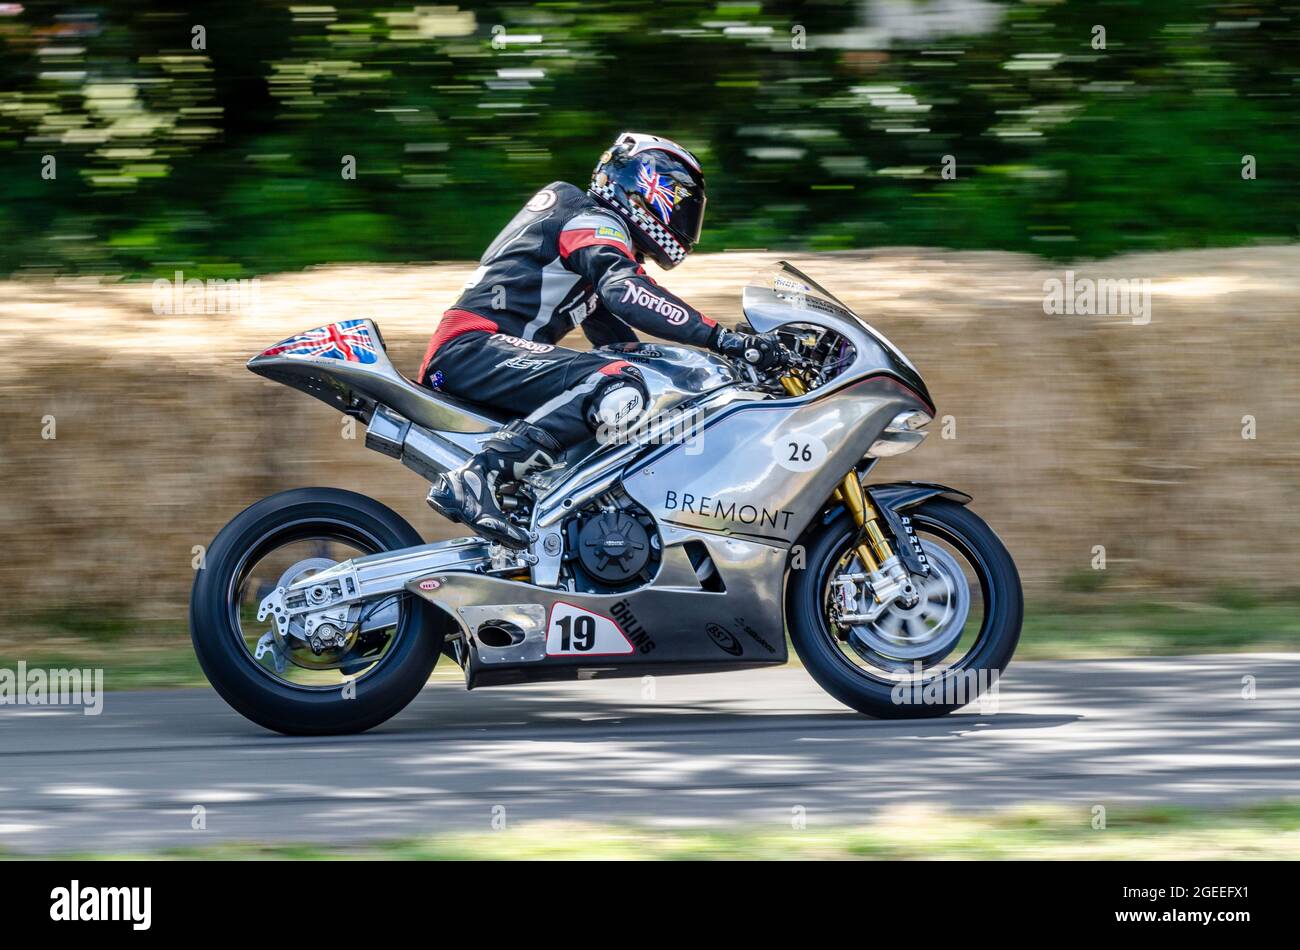 Bremont Norton SG3 TT motorcycle racing up the hill climb track at the Goodwood Festival of Speed motor racing event 2014 Stock Photo